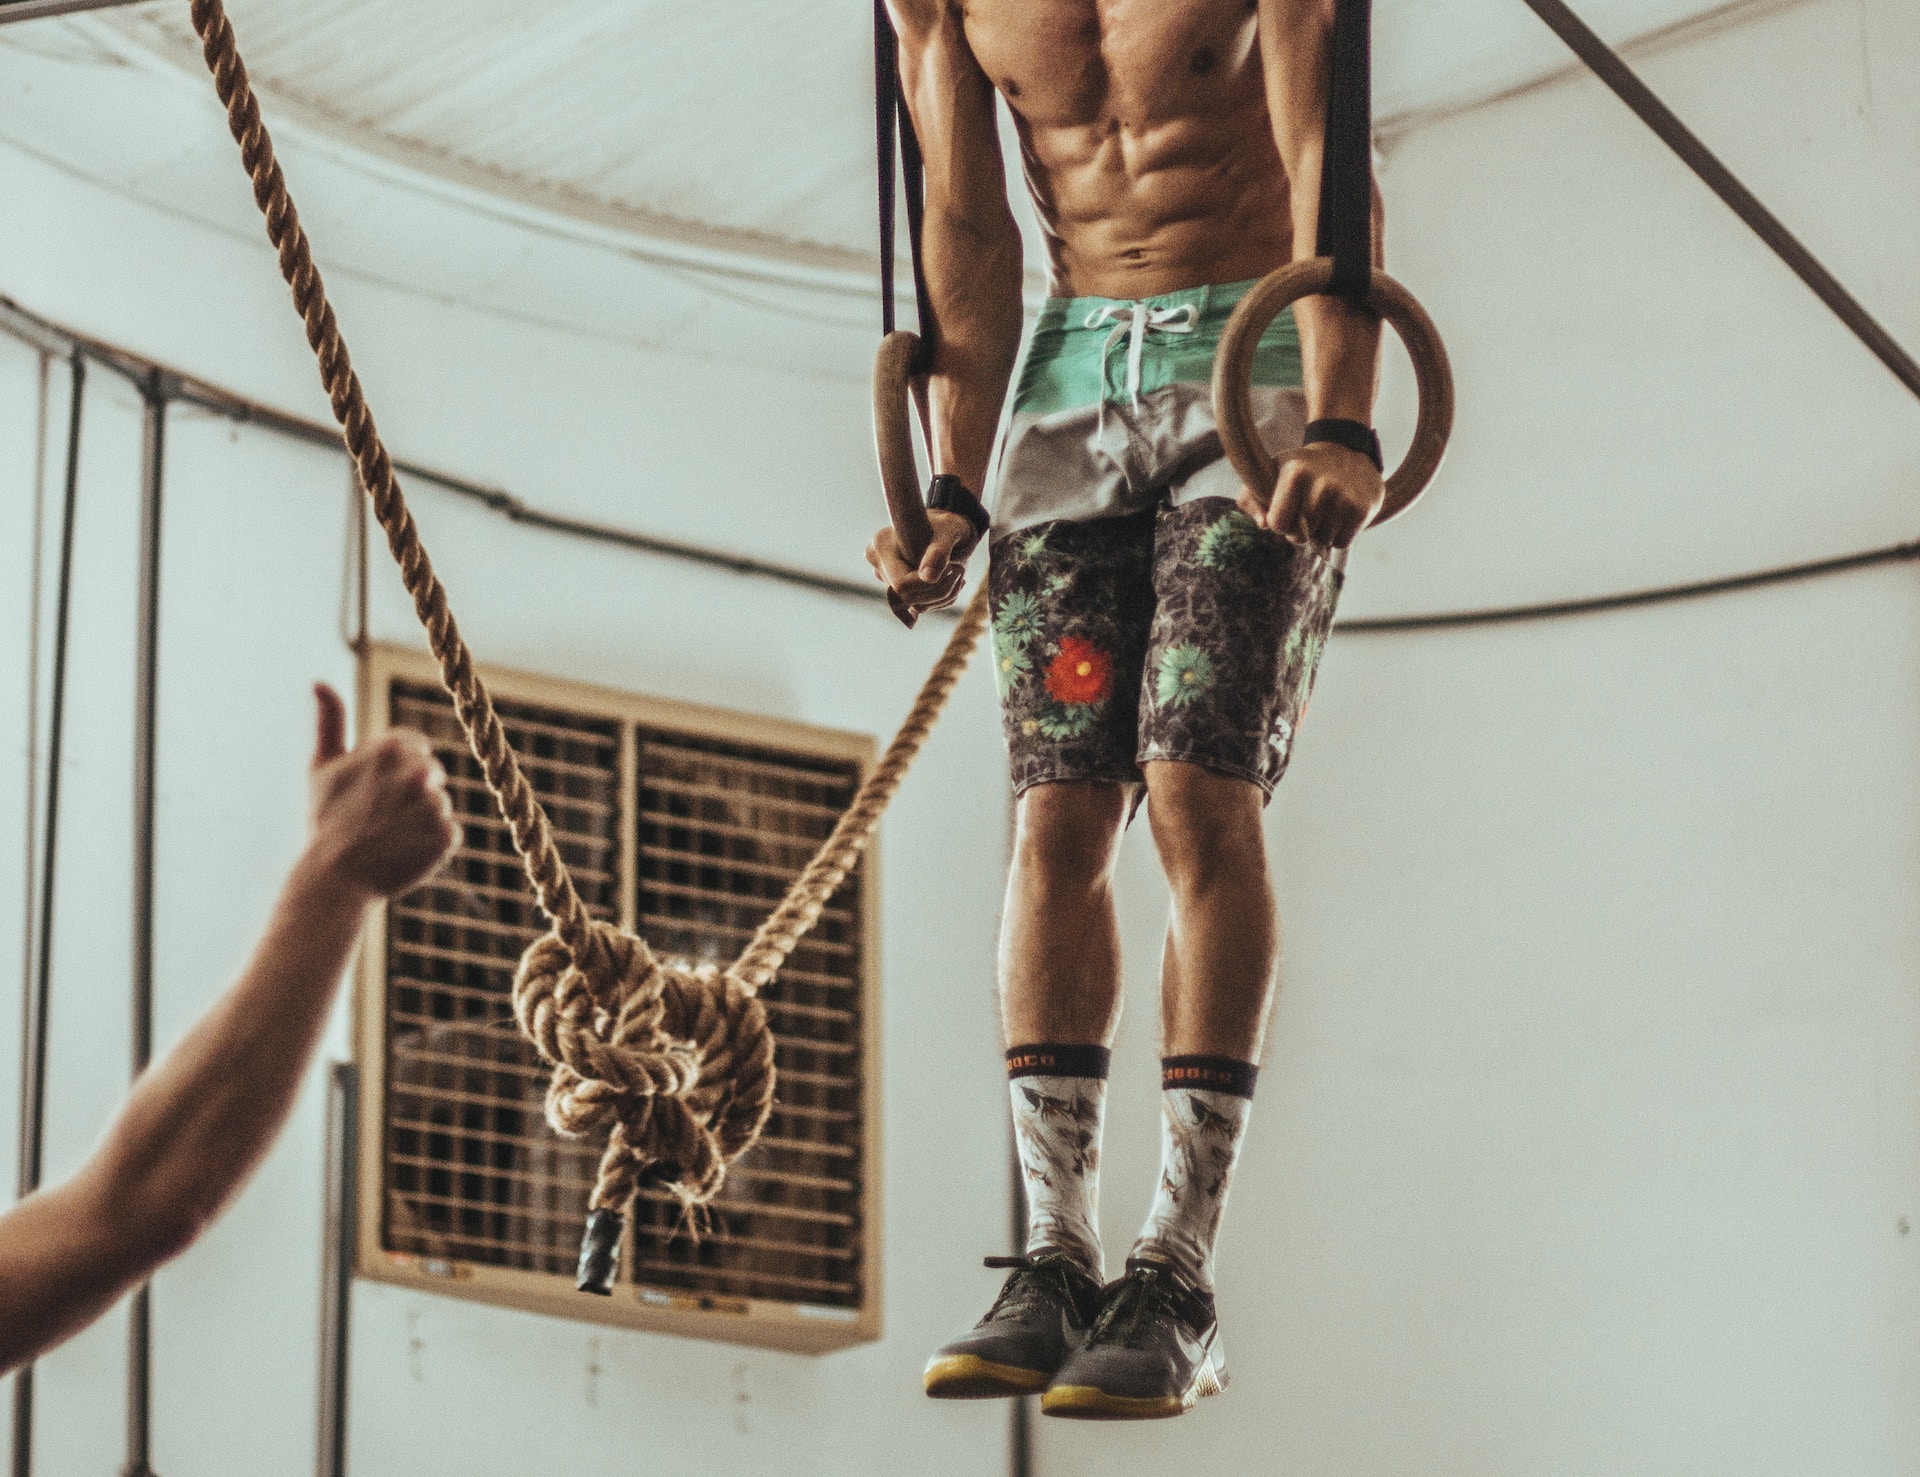 the image shows a sportsman pulling up on the ropes